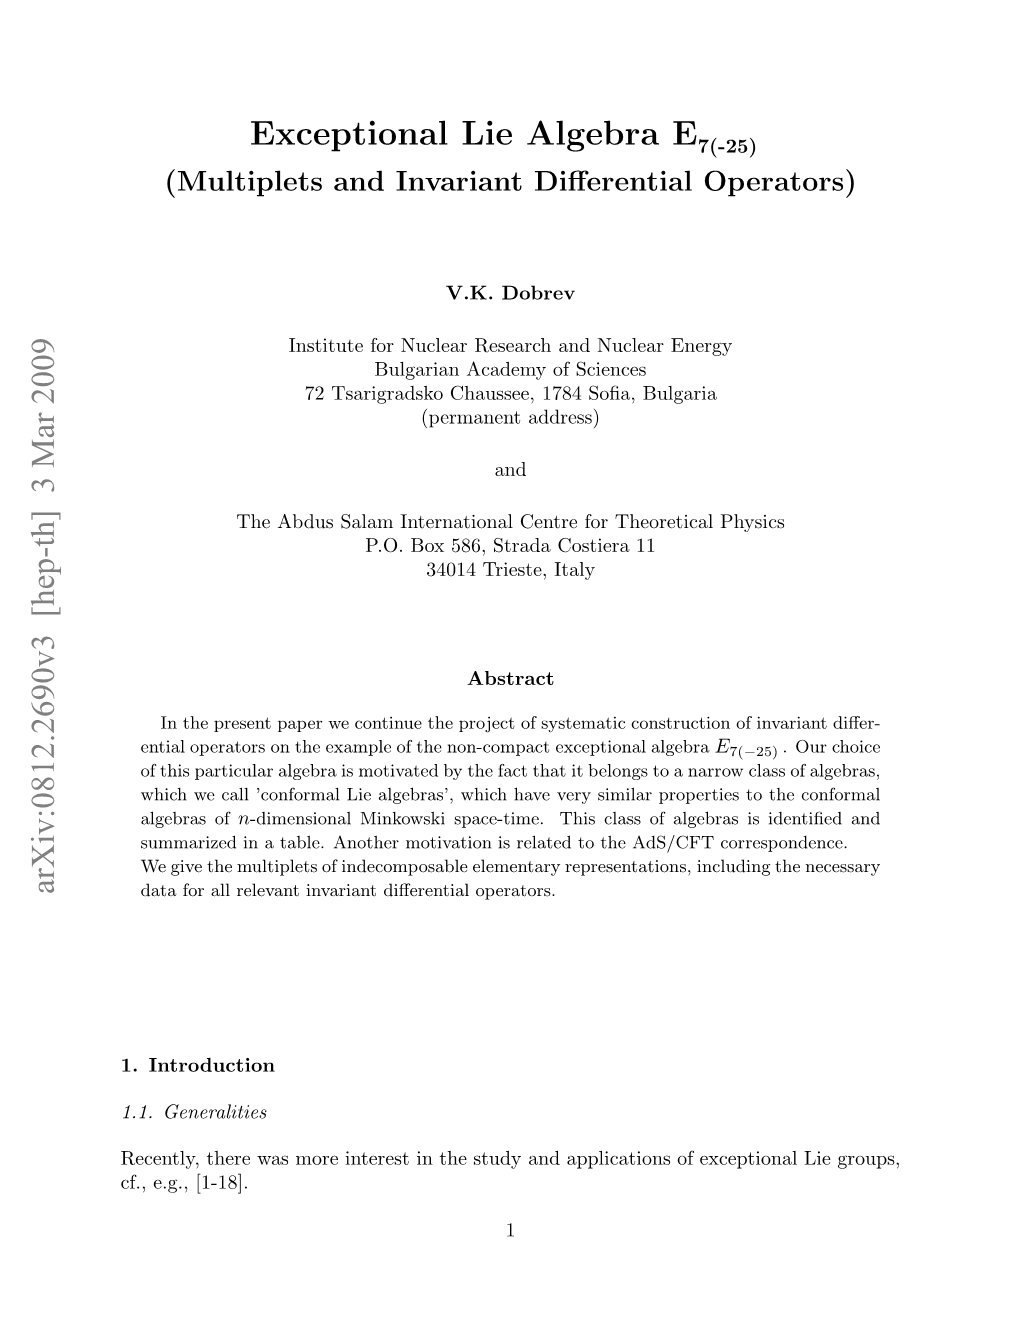 Exceptional Lie Algebra $ E {7 (-25)} $(Multiplets and Invariant